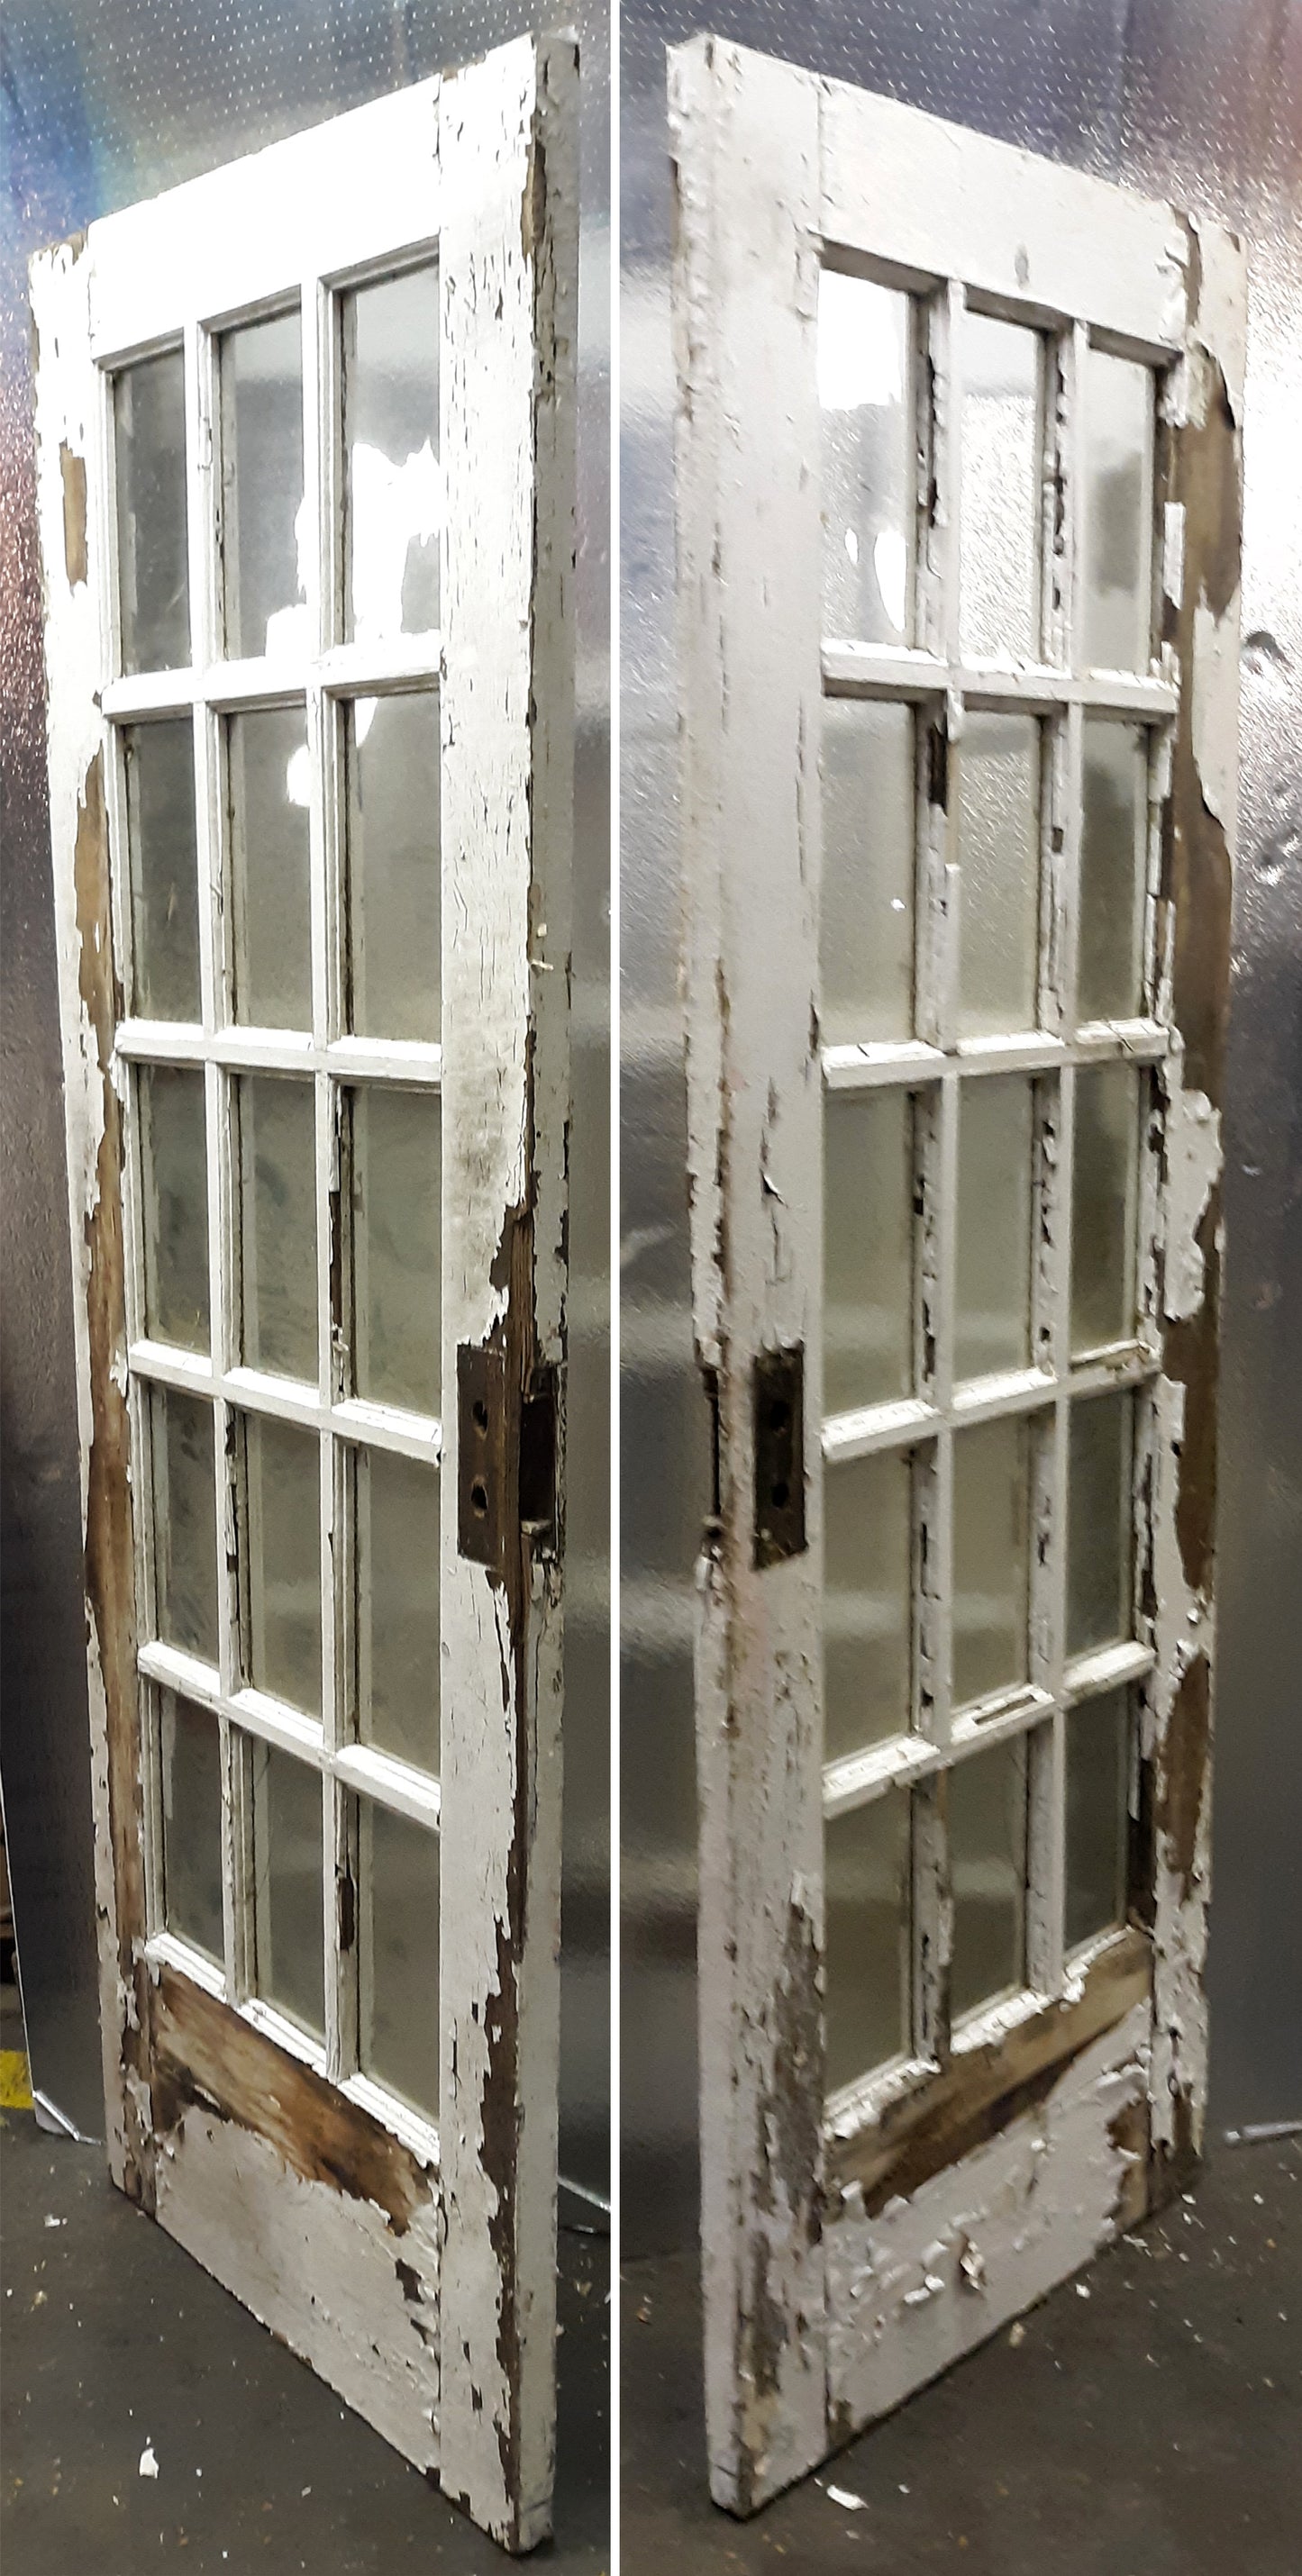 31.5"x79"x1.75" Antique Vintage Old Reclaimed Salvaged Wood Wooden Interior French Door Window Glass